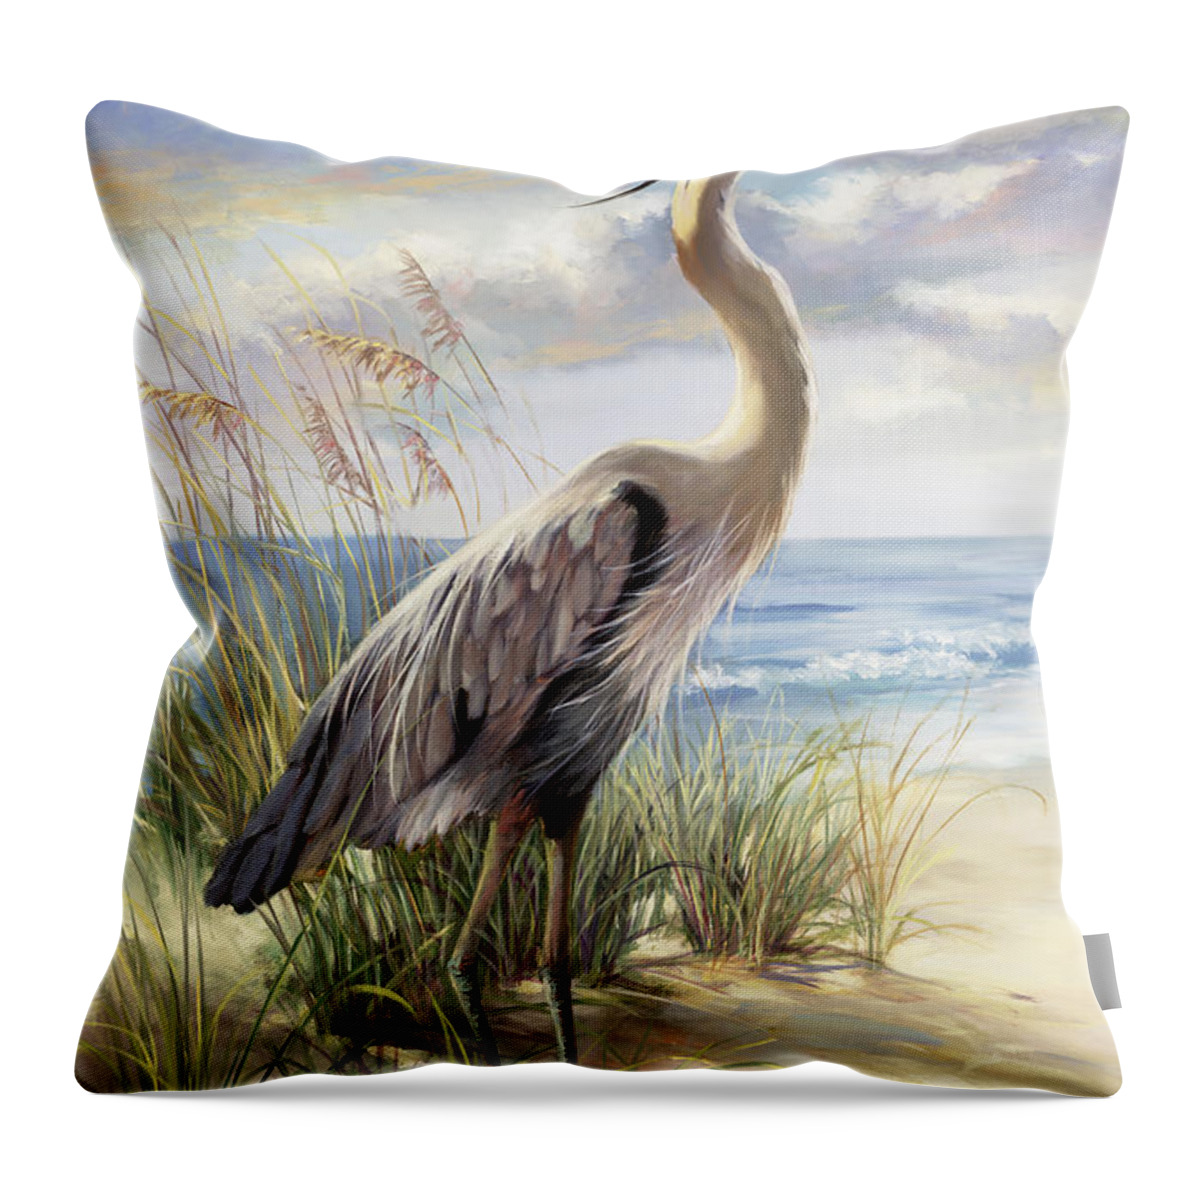 Heron Throw Pillow featuring the painting Blue Heron Deux by Laurie Snow Hein